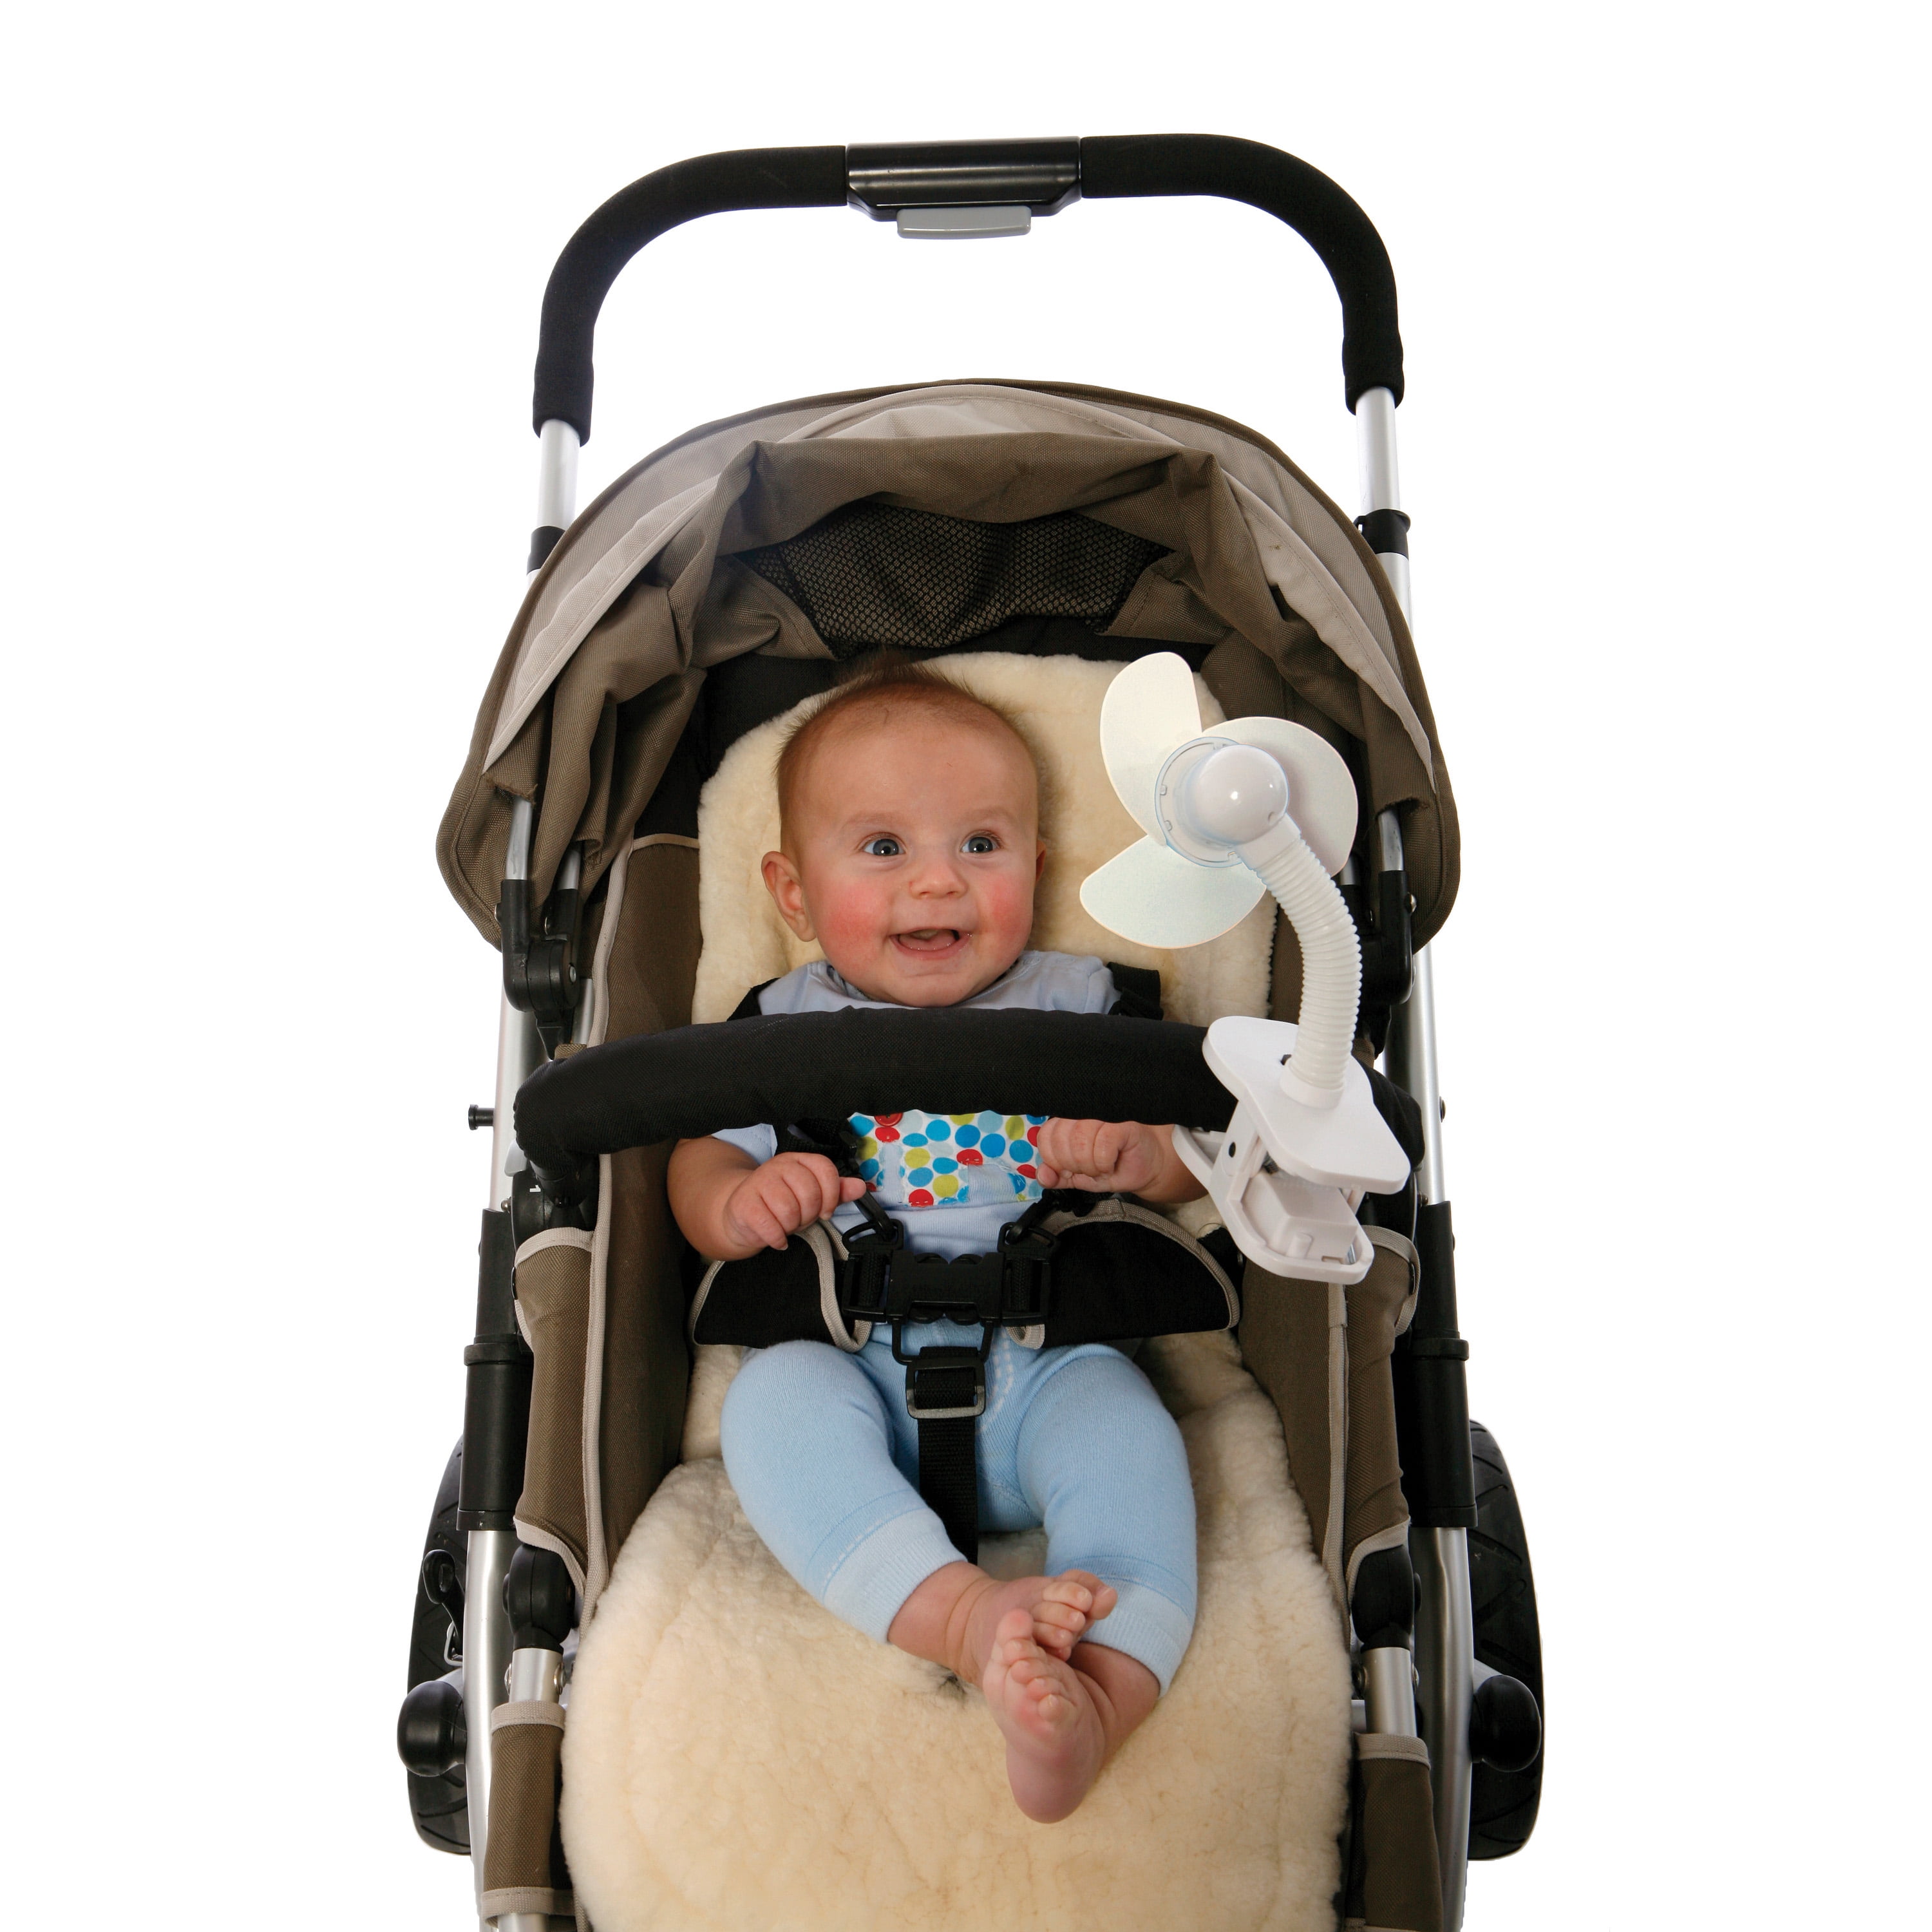 Portable Foam Fan For Stroller Pushchair In The Car / Travelling Cribs Cot 